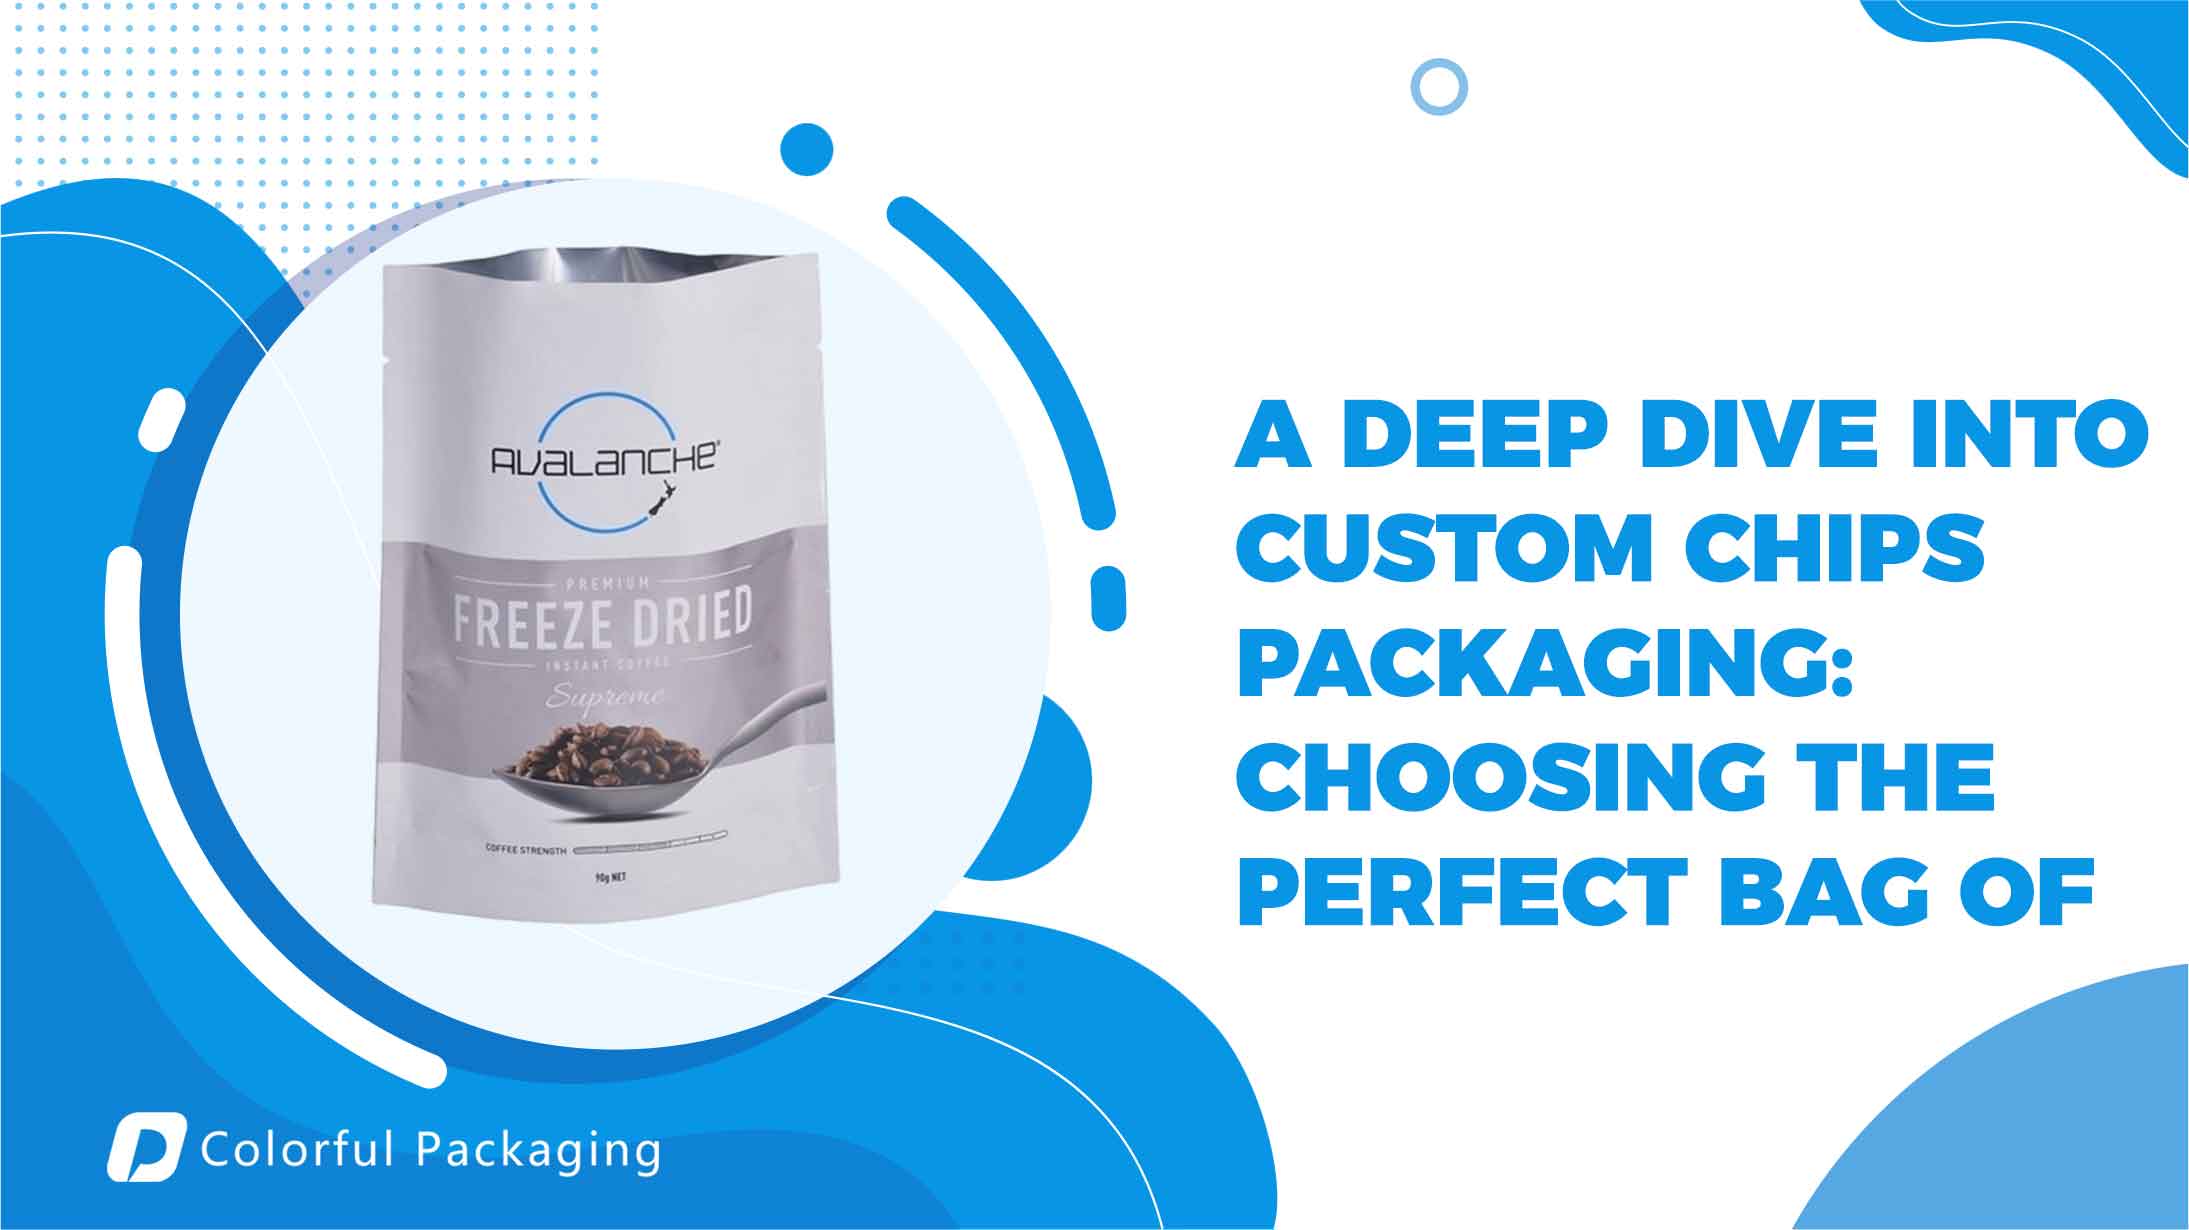 A Deep Dive into Custom Chips Packaging: Choosing the Perfect Bag of Chips